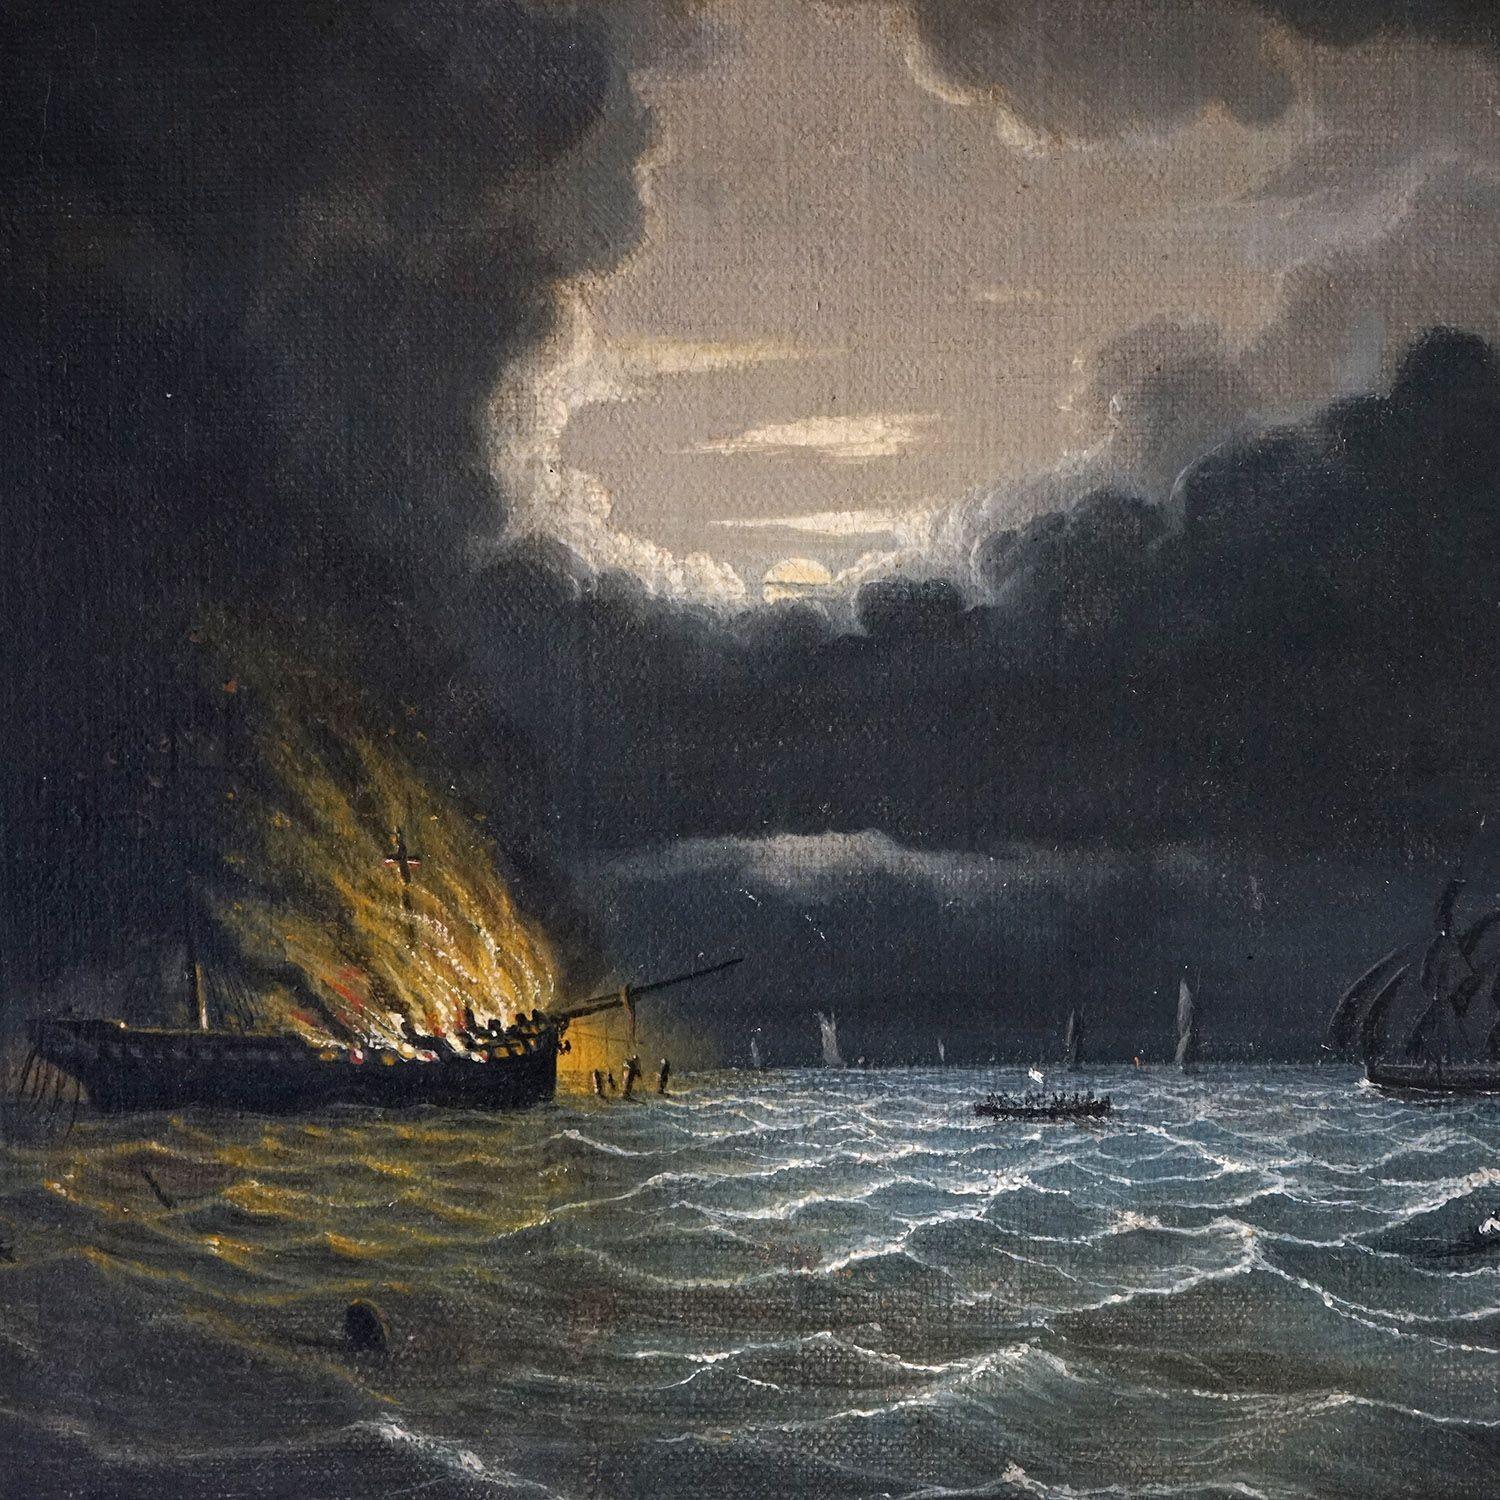 Antique Original Oil Painting, 19th Century

A ship is ablaze burning with flames and there are lifeboats attempting to rescue the crew. There is a stormy sky and the sea is choppy. The scene is illuminated by a break in the clouds.

There is an